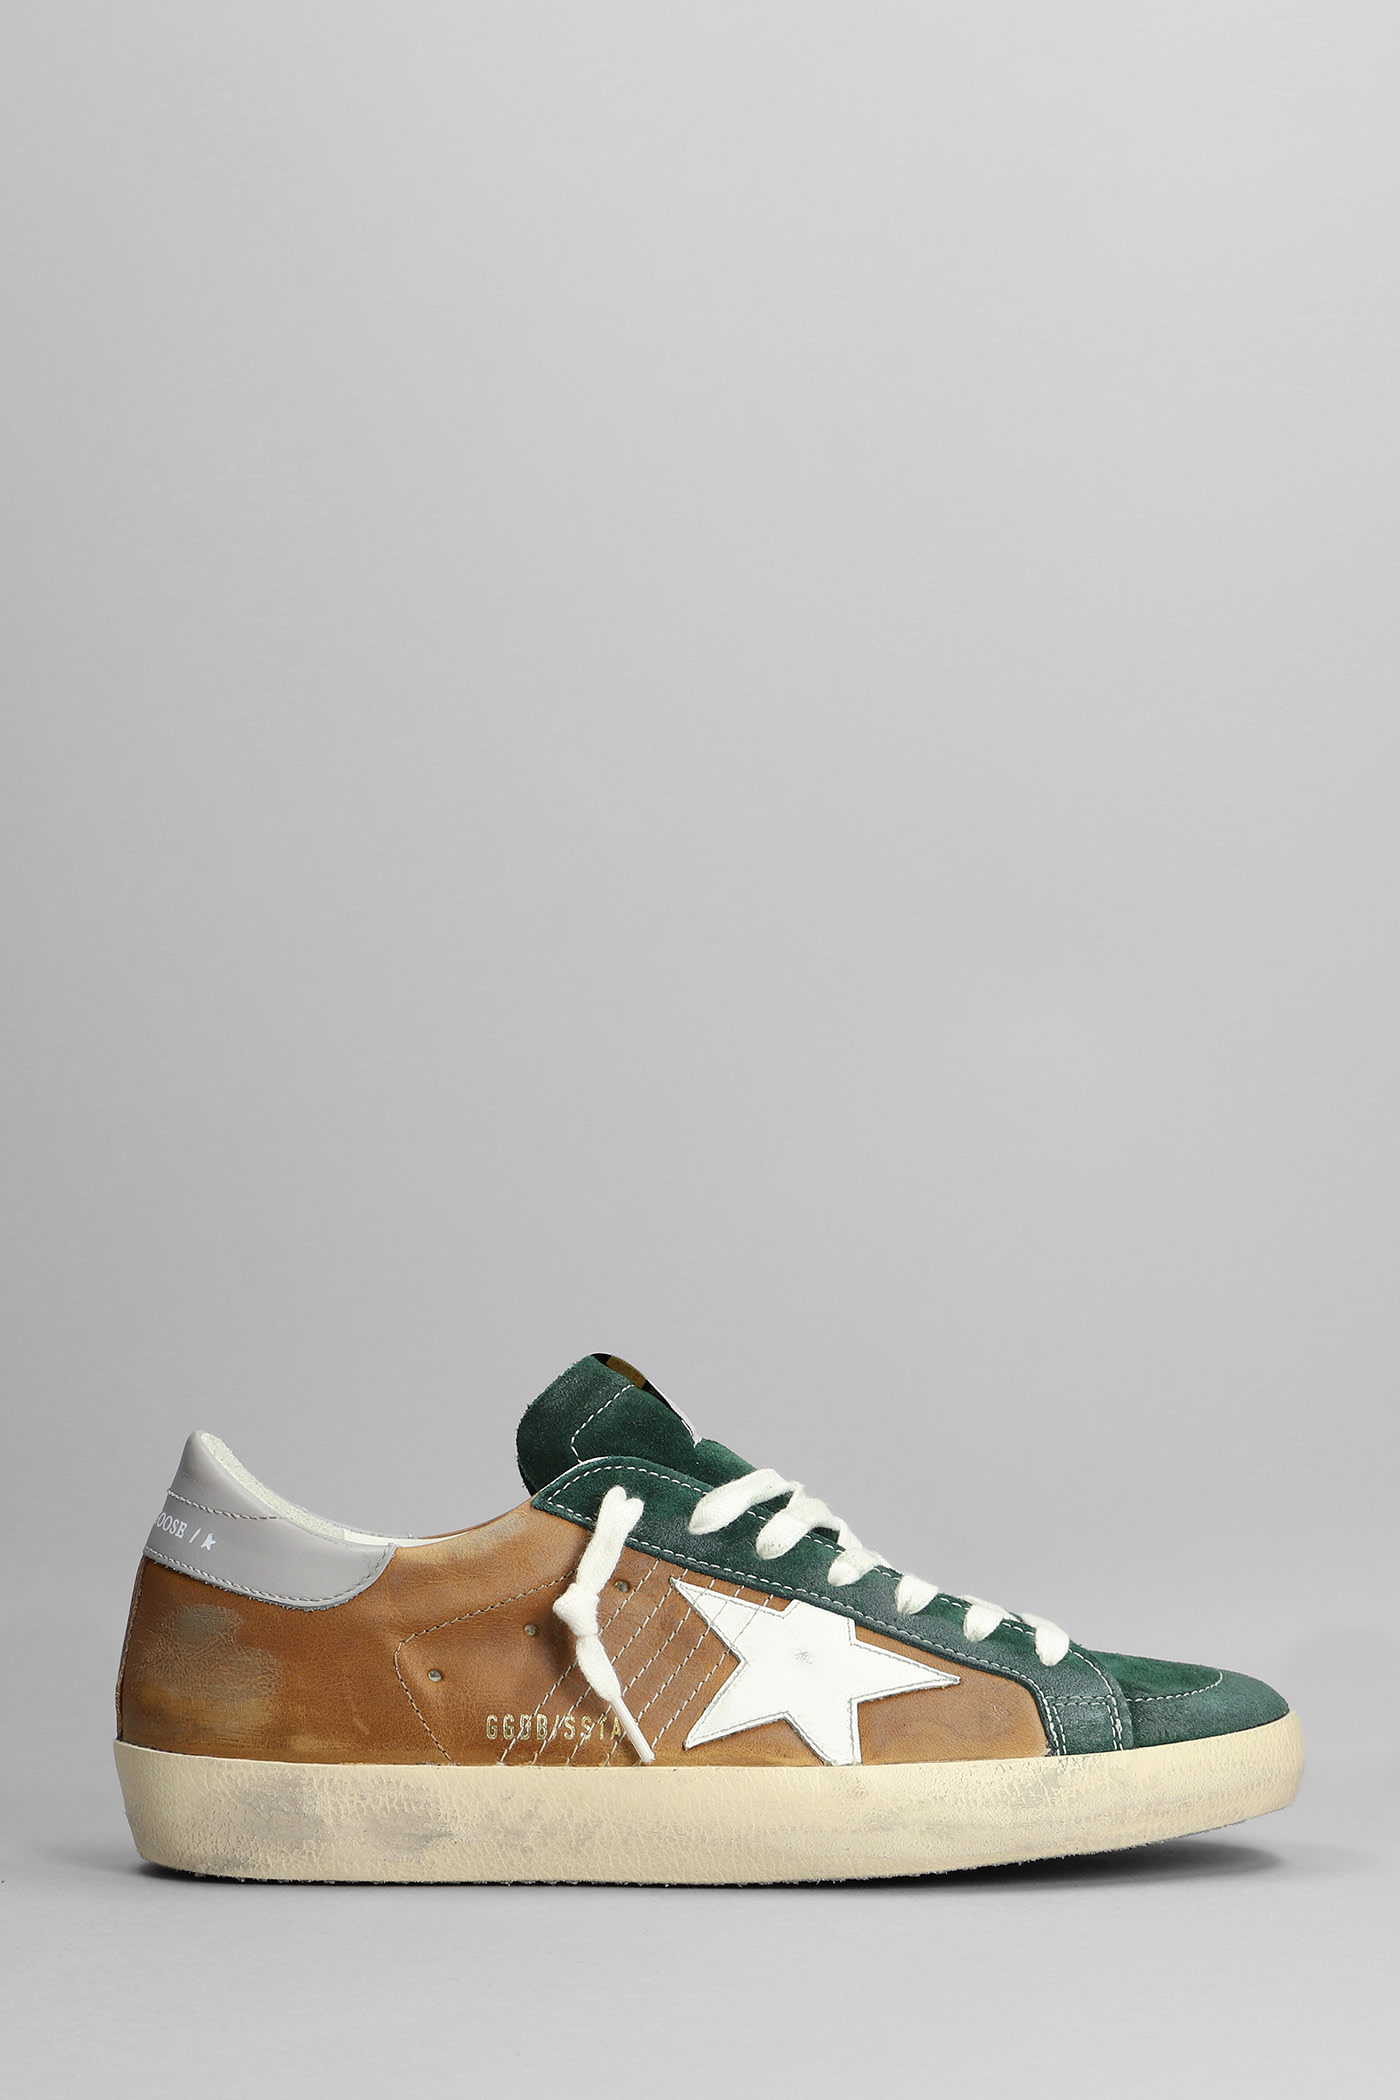 Golden Goose Superstar Sneakers In Leather Color Suede And Leather